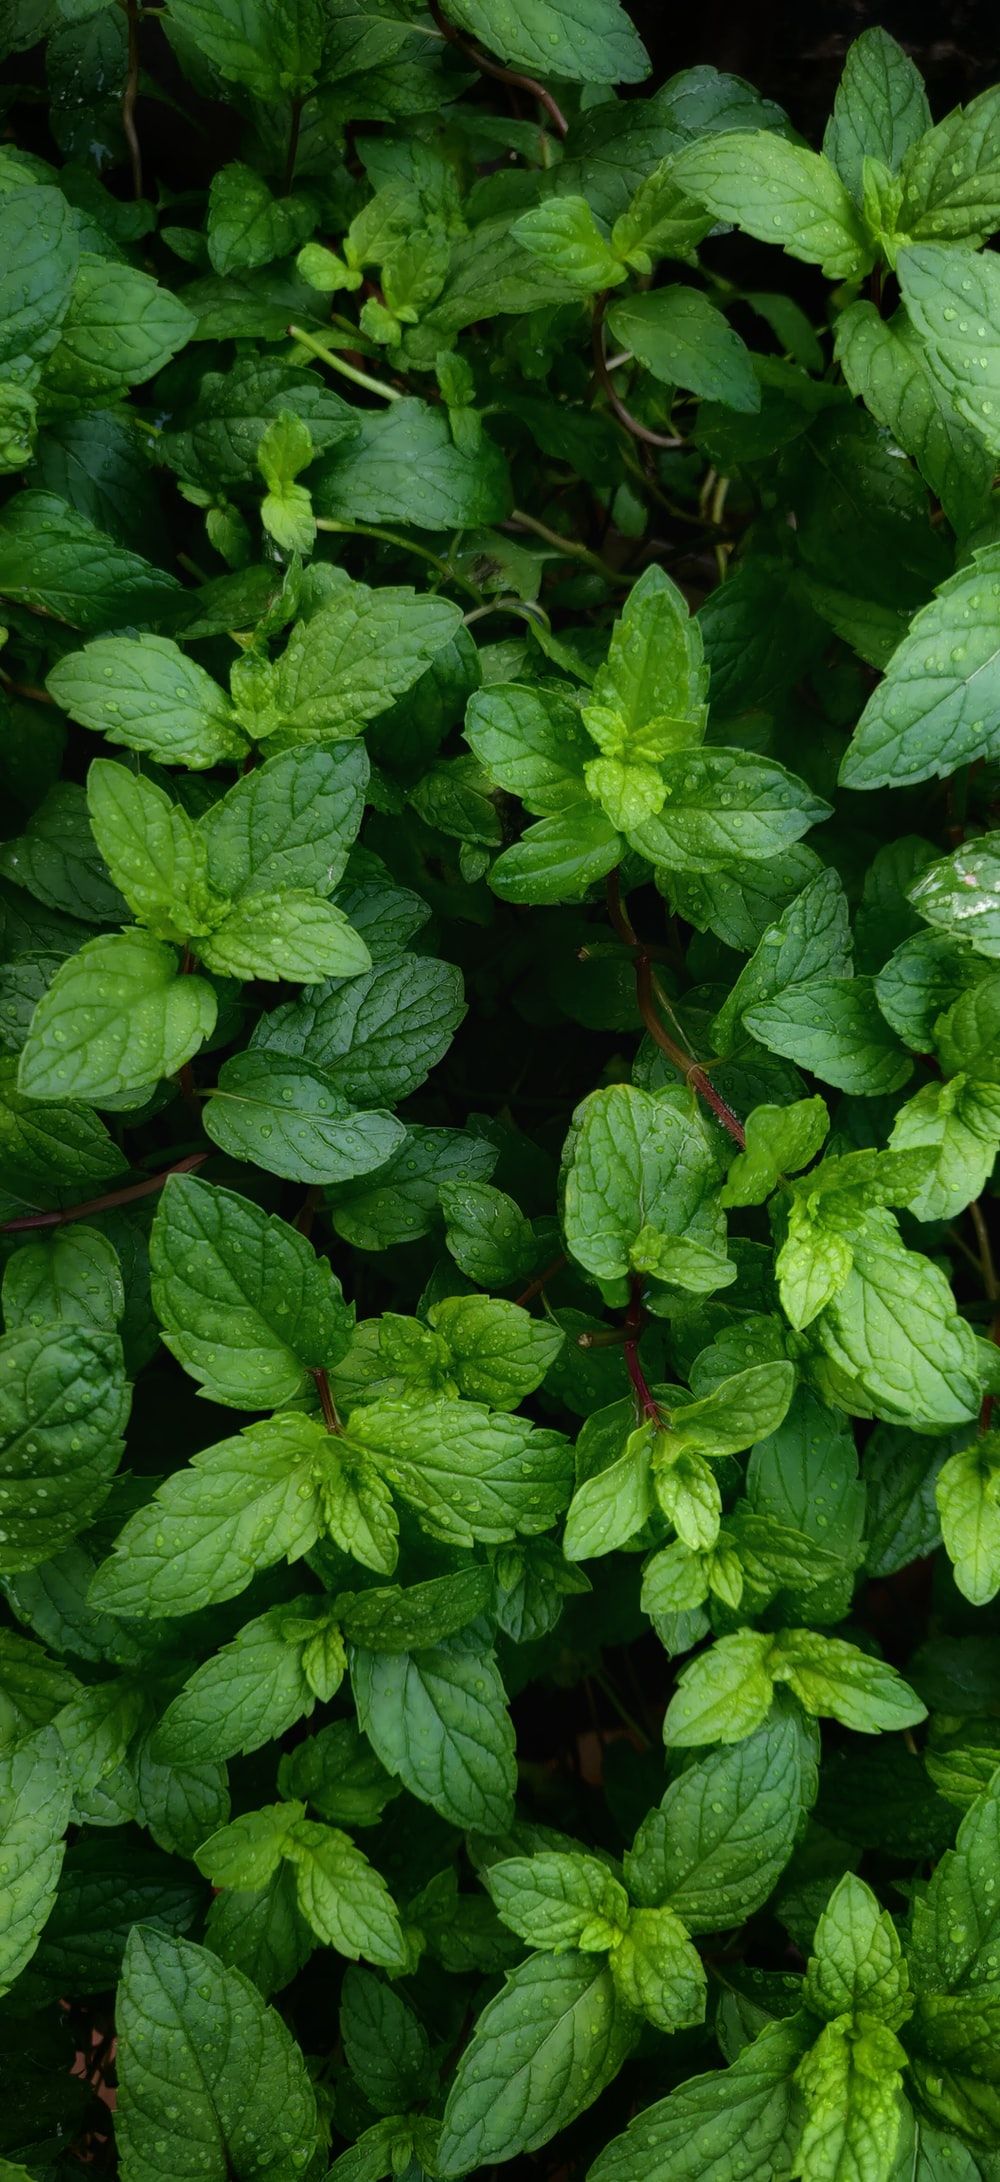 Mint Leaves Picture. Download Free Image